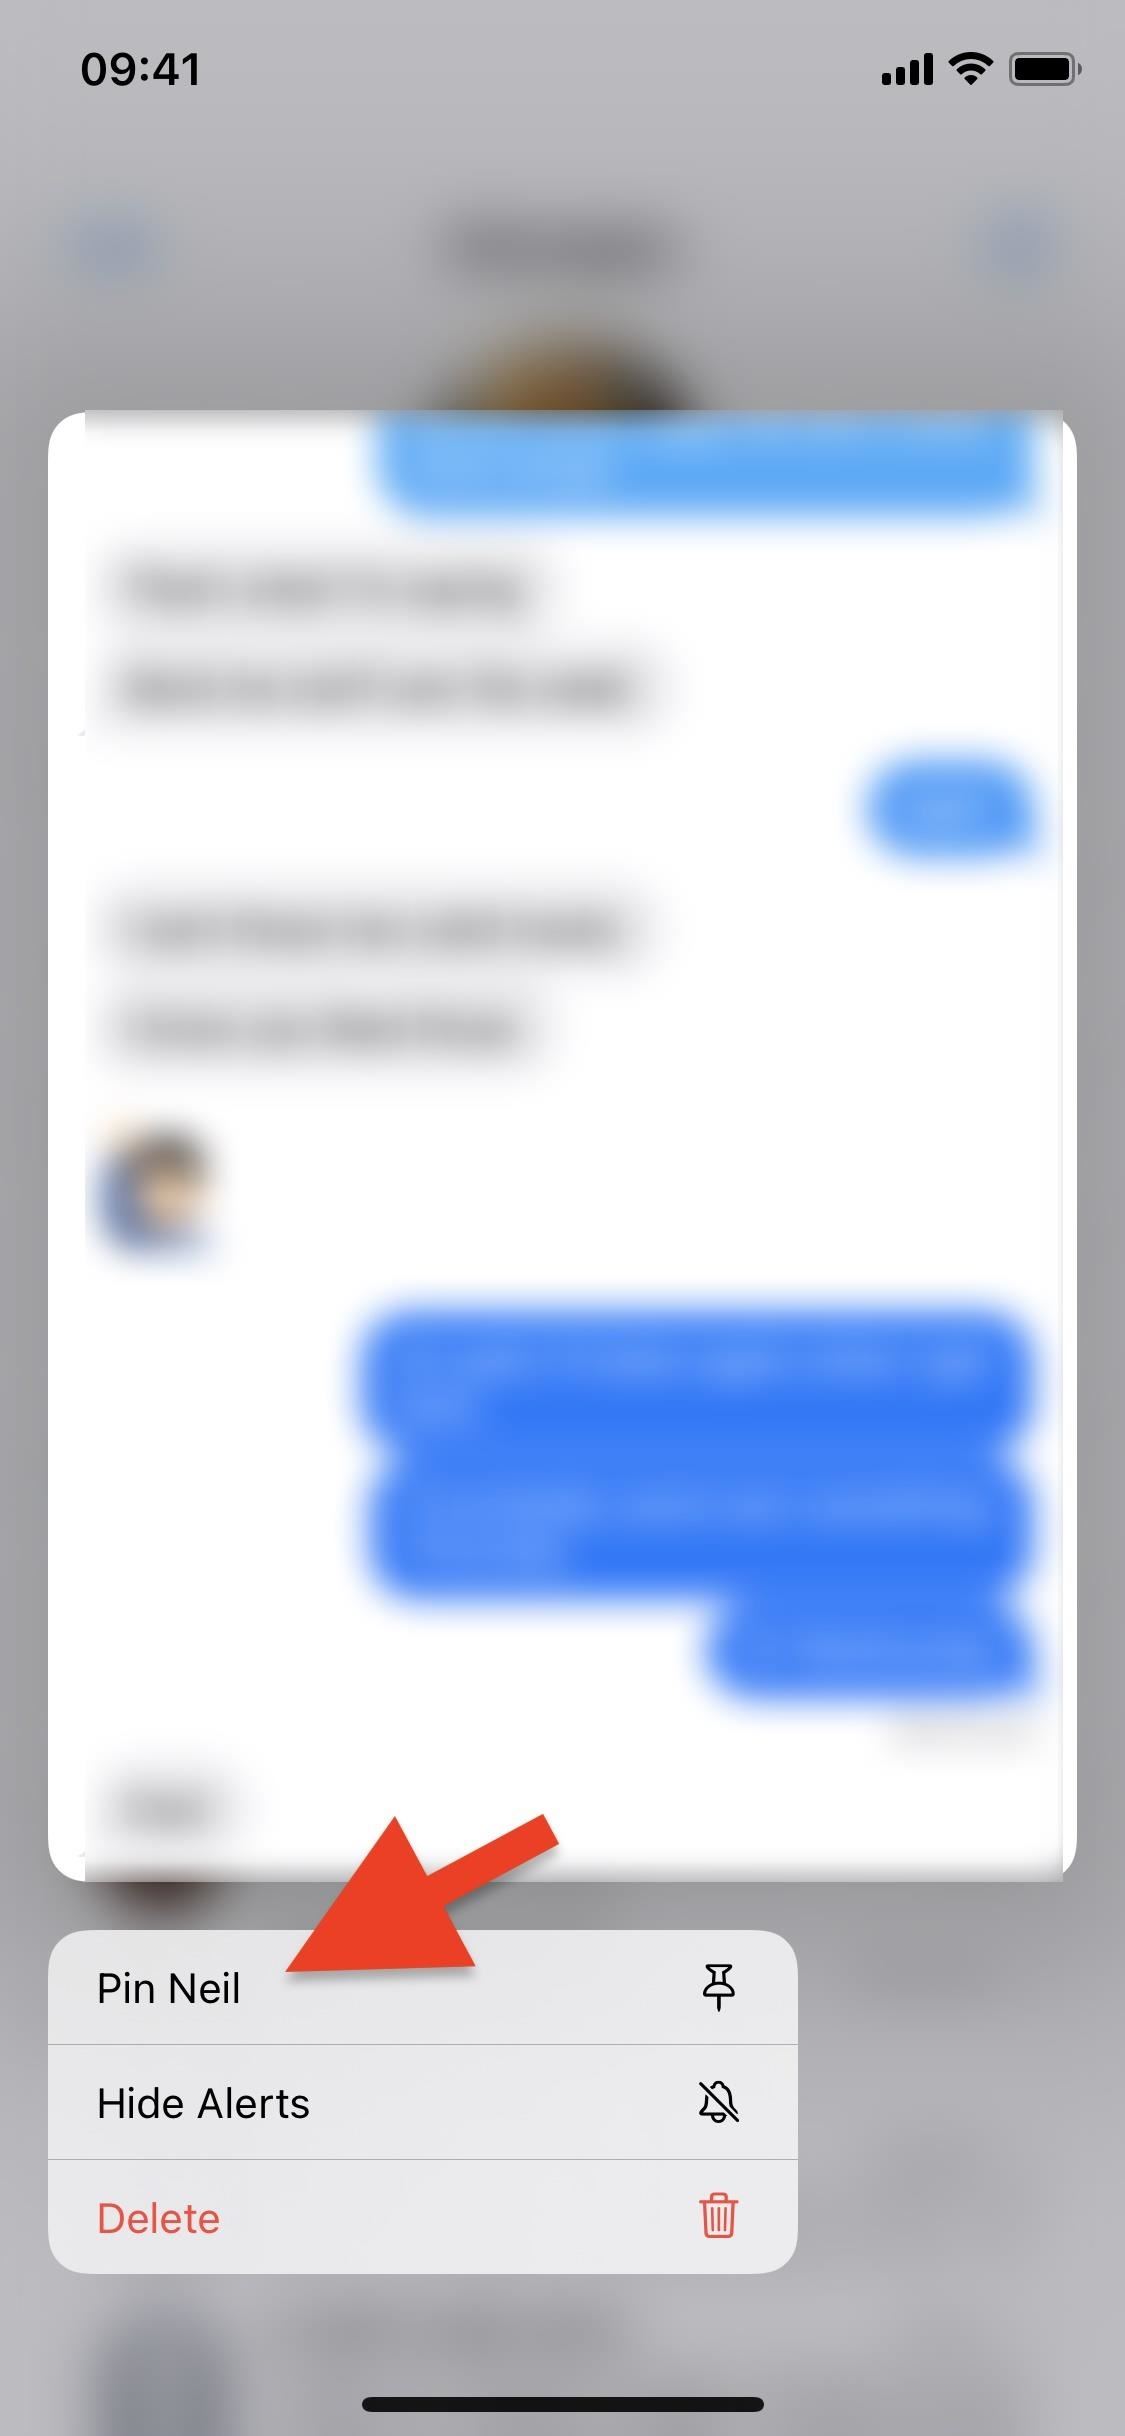 How to Pin & Unpin Conversations to the Top of Messages in iOS 14